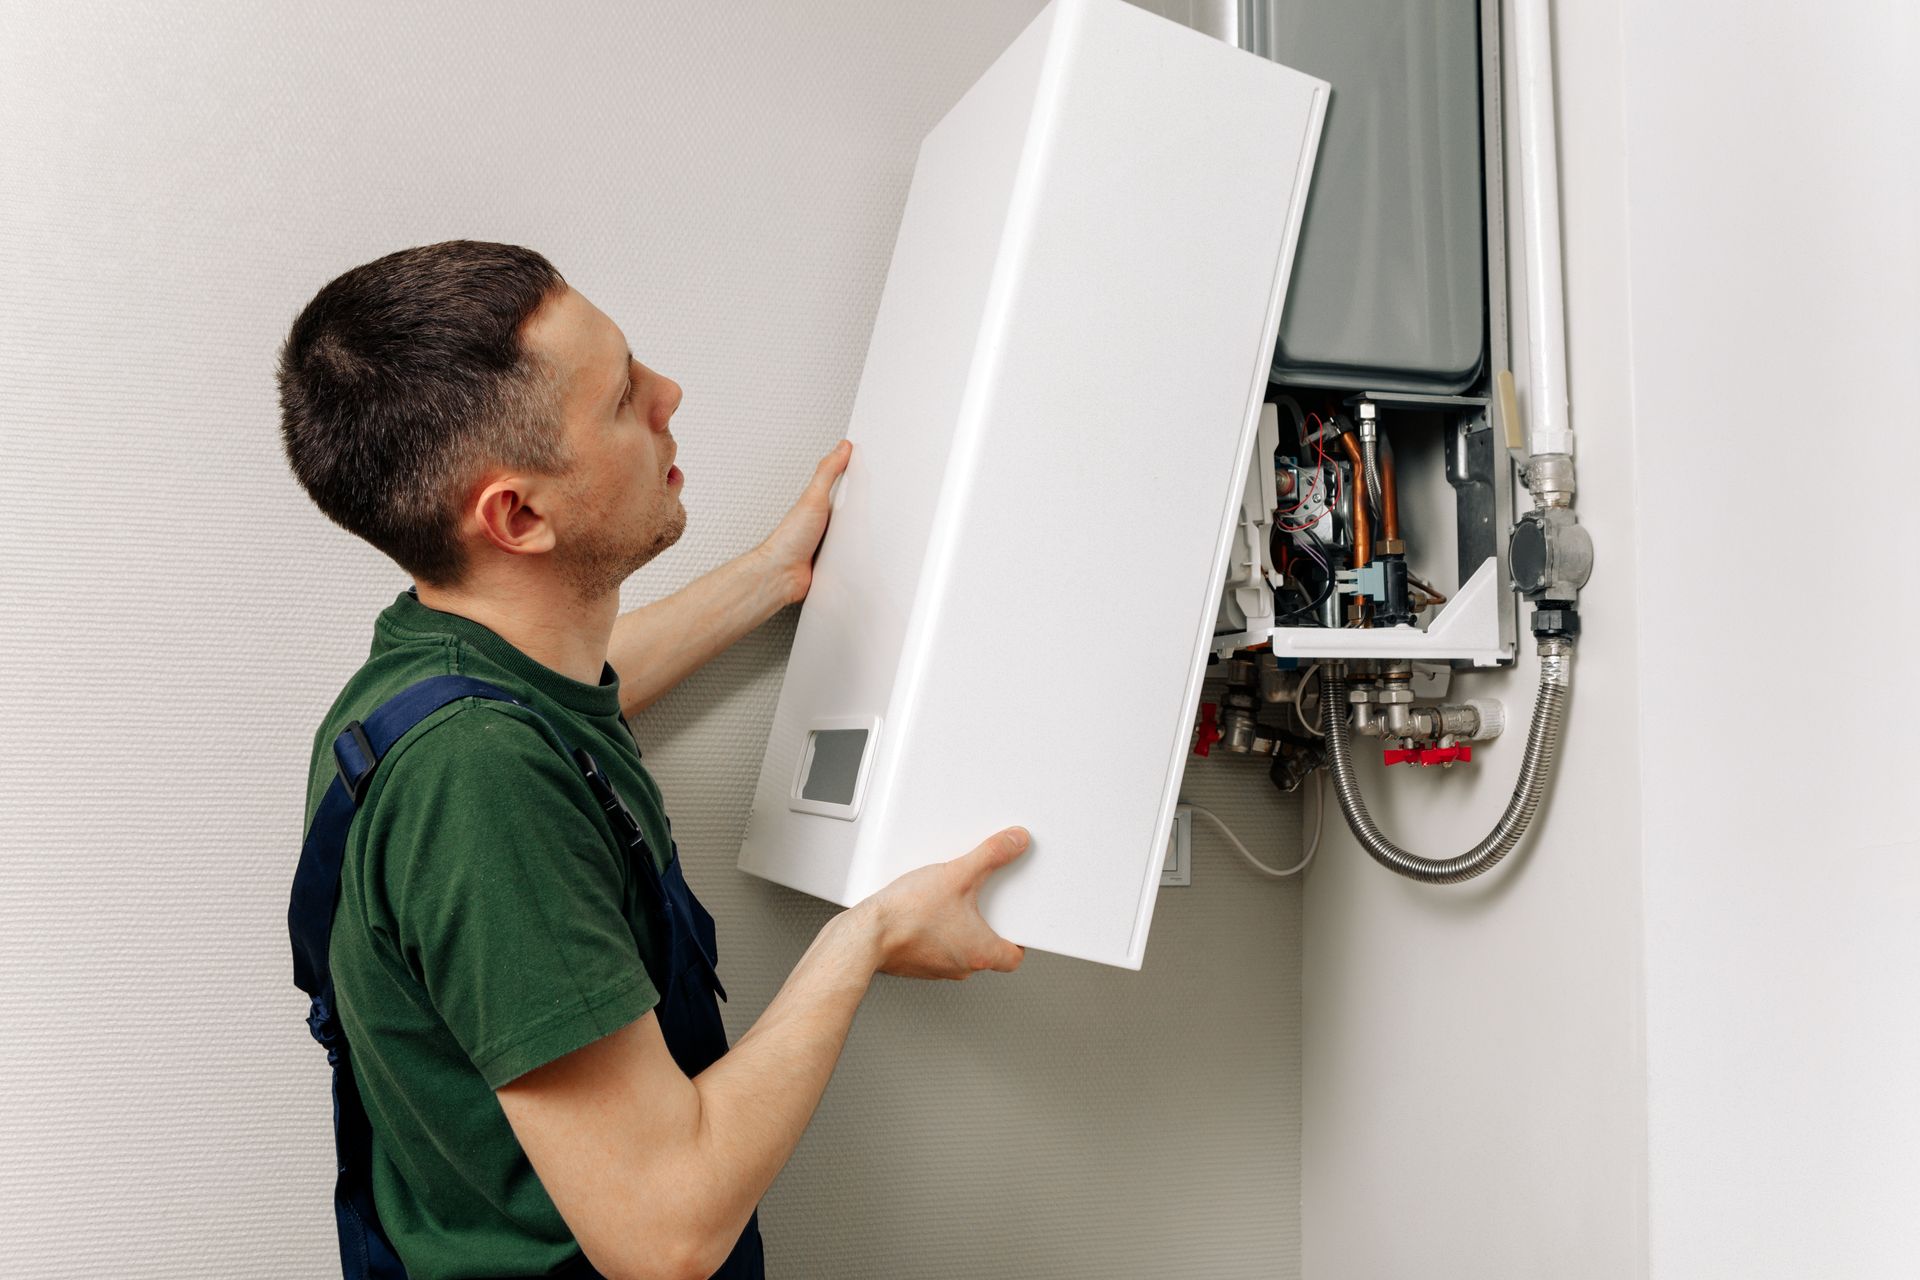 A man is installing a boiler on a wall.